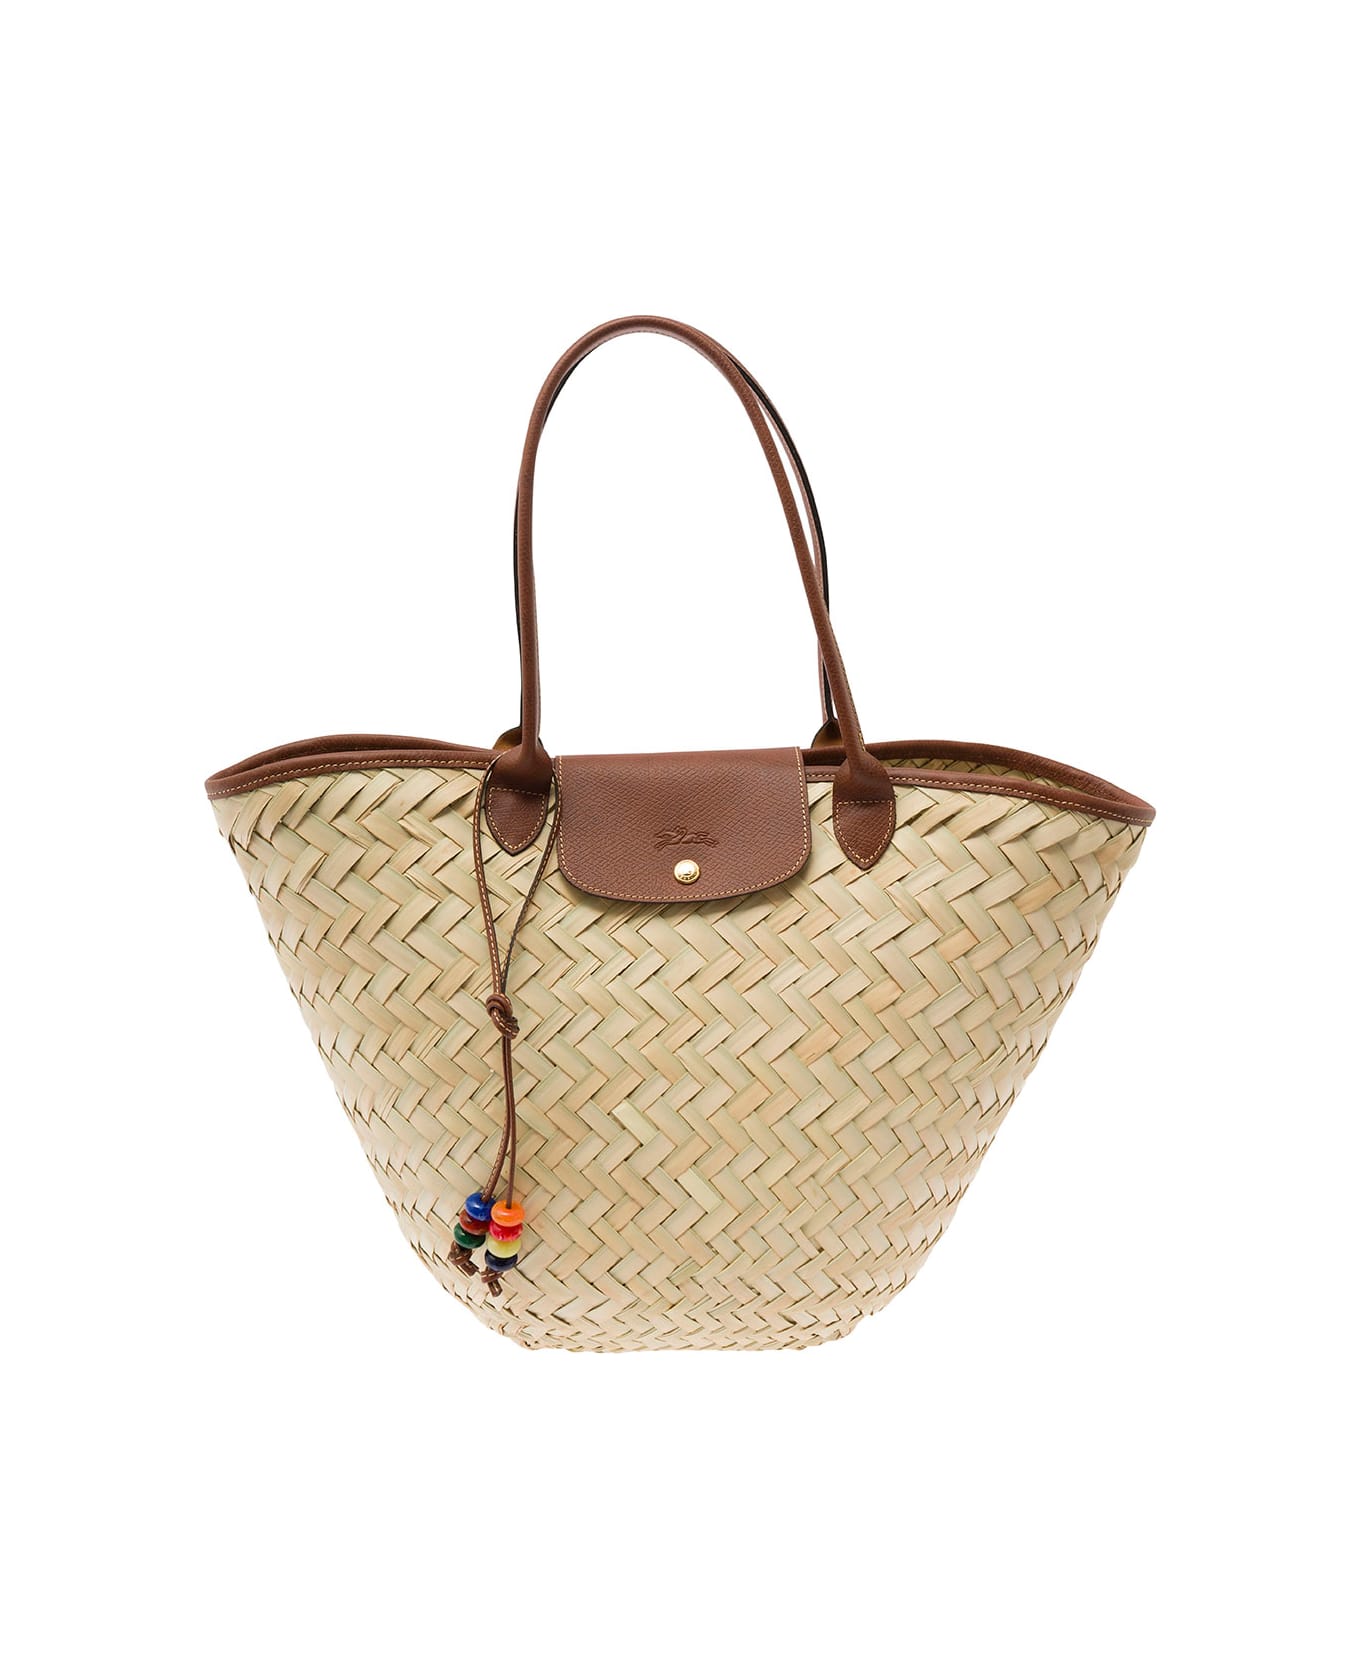 Longchamp 'xl Le Panier' Beige Tote Bag With Beads Strap In Straw Woman - Beige トートバッグ